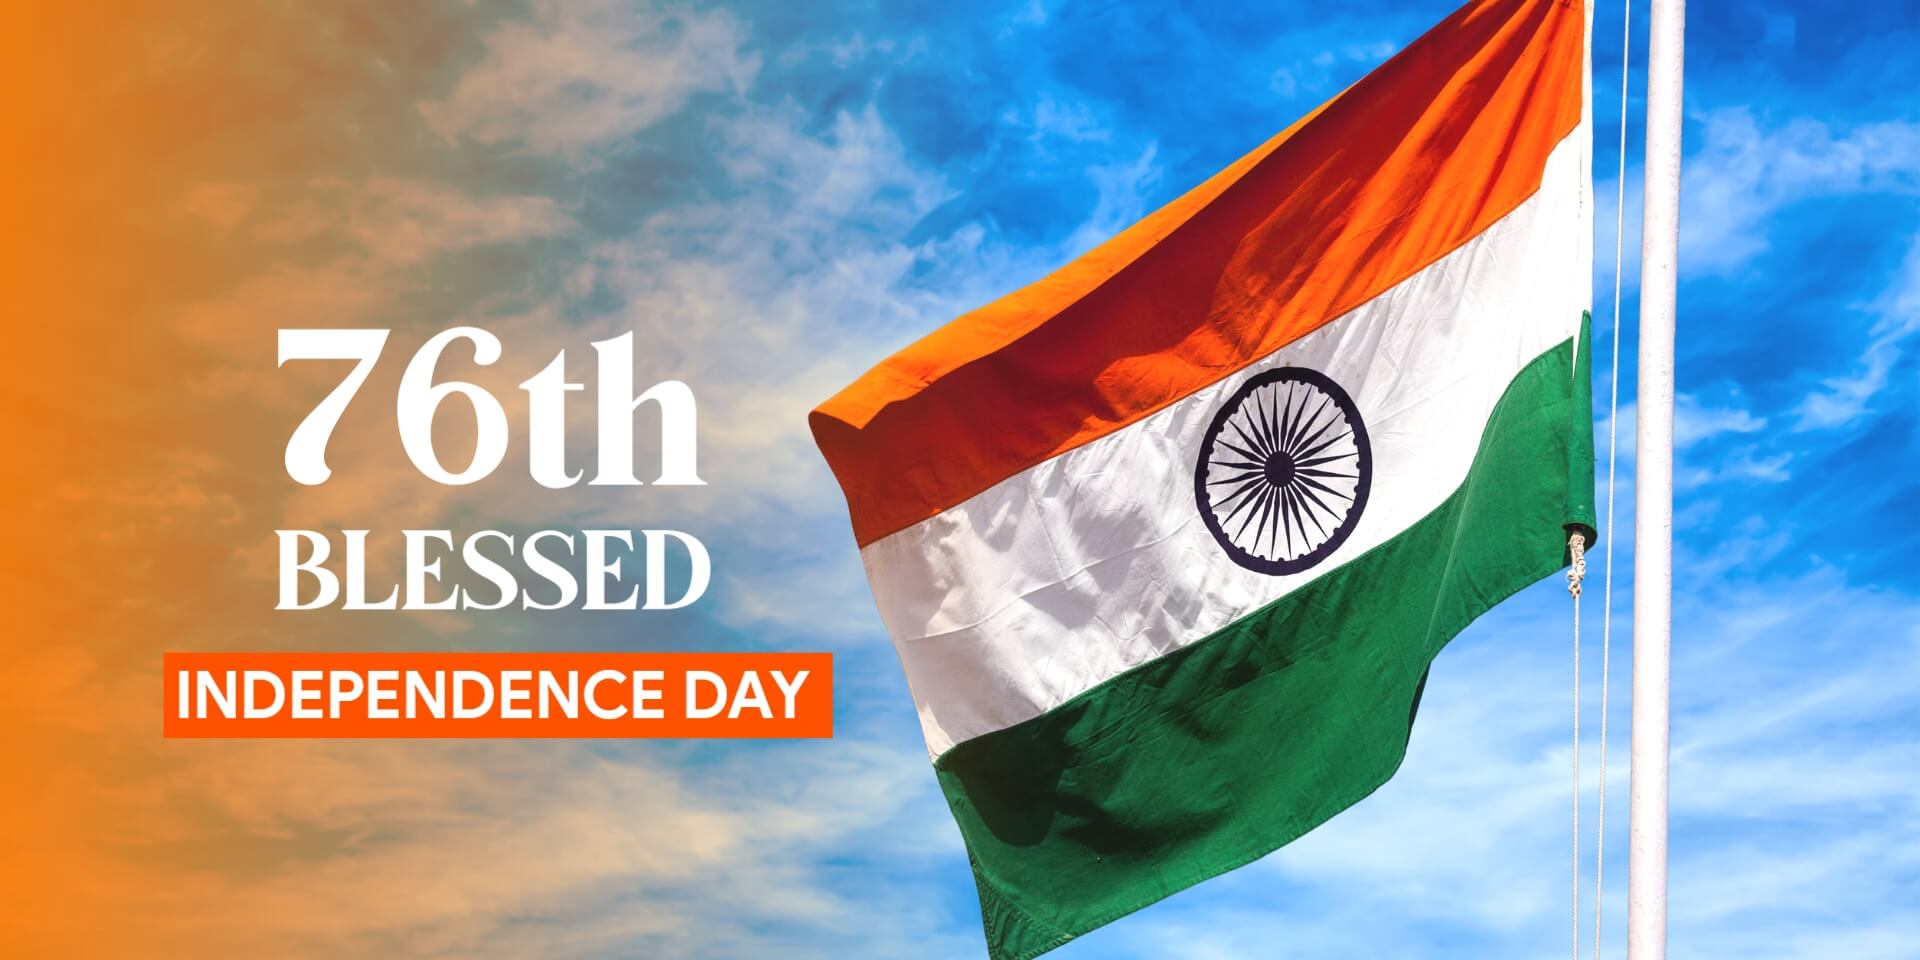 76th India Independence Day Images, Photos & Pictures